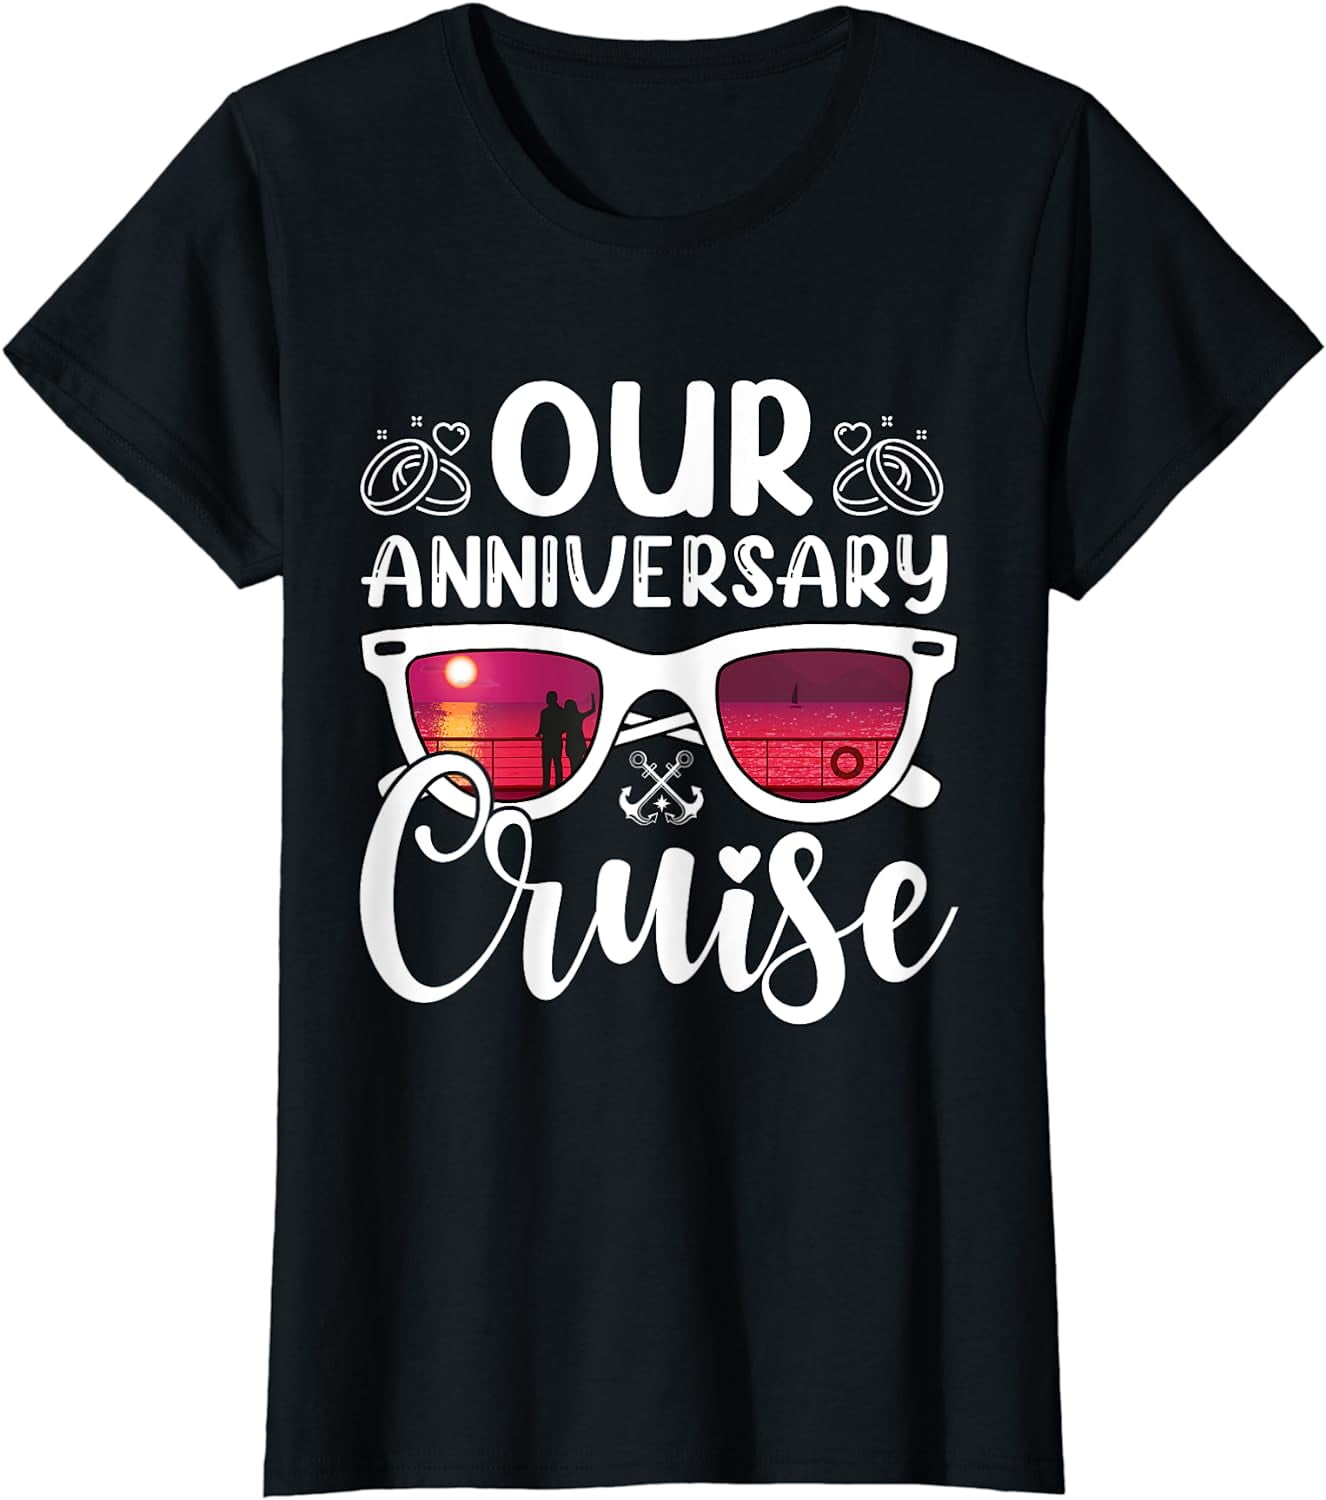 Our Anniversary Cruise Trip Wedding Husband Wife Couple T-Shirt ...